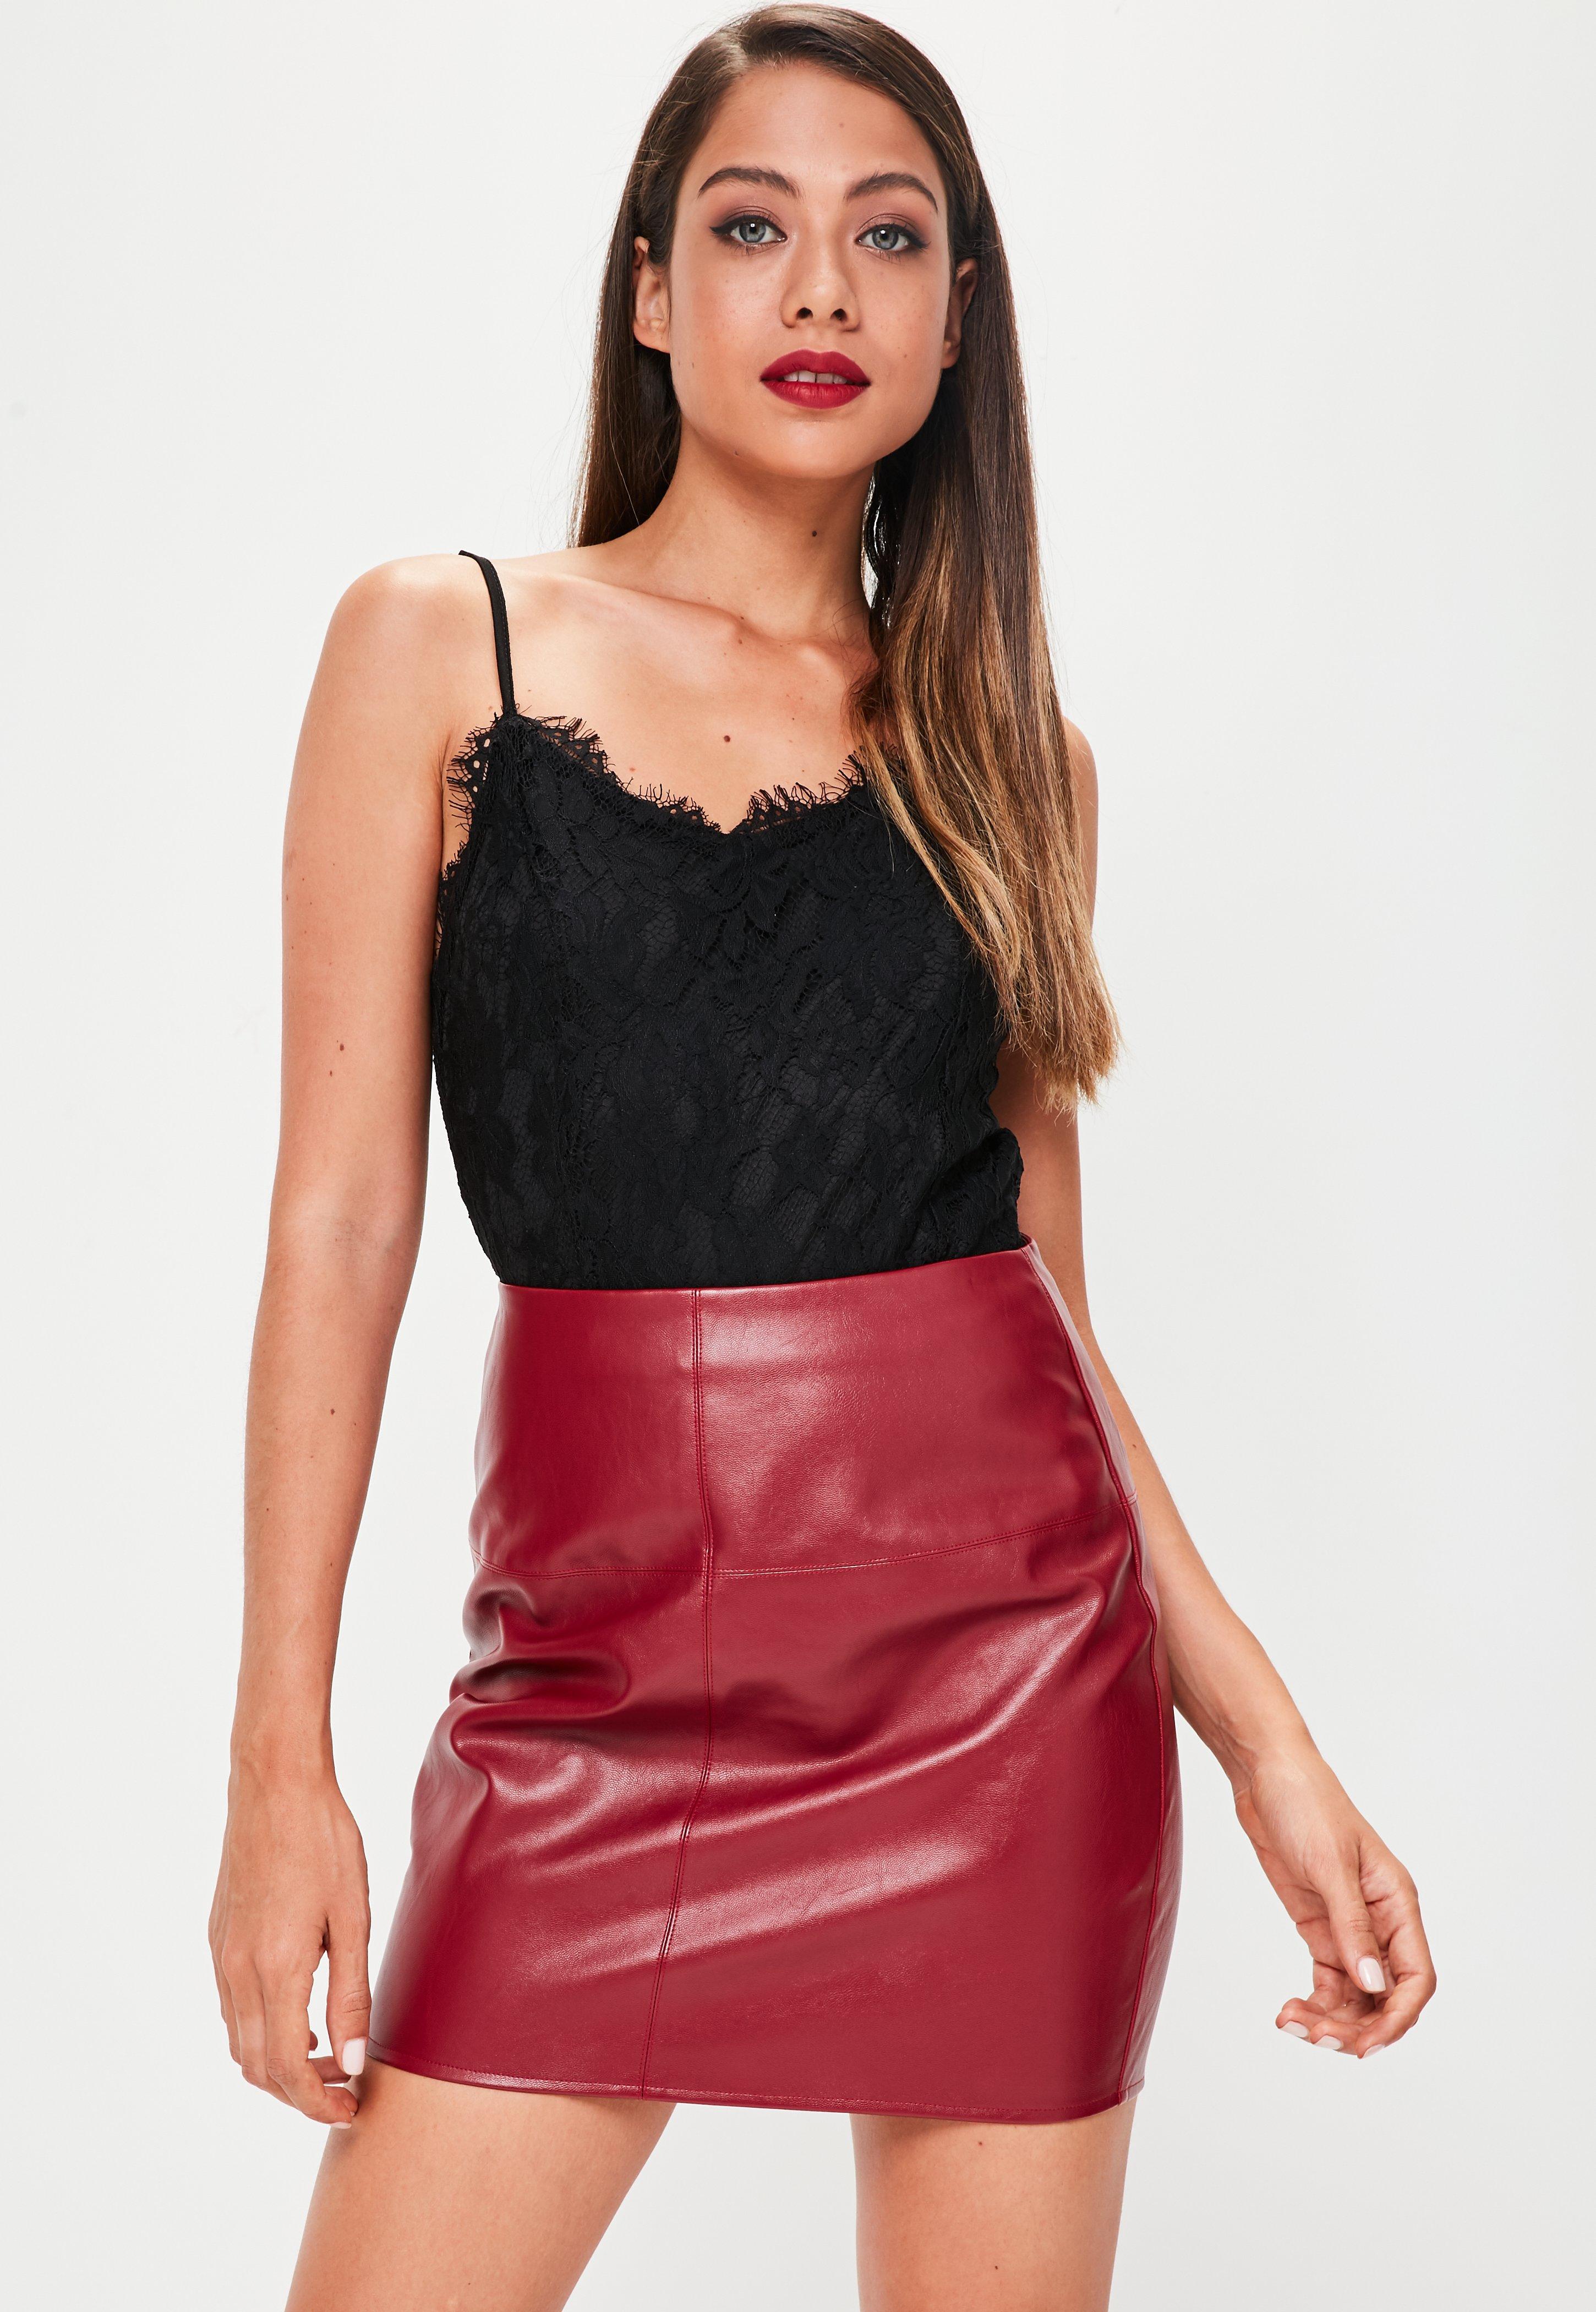 Lyst - Missguided Burgundy Faux Leather Mini Skirt in Red